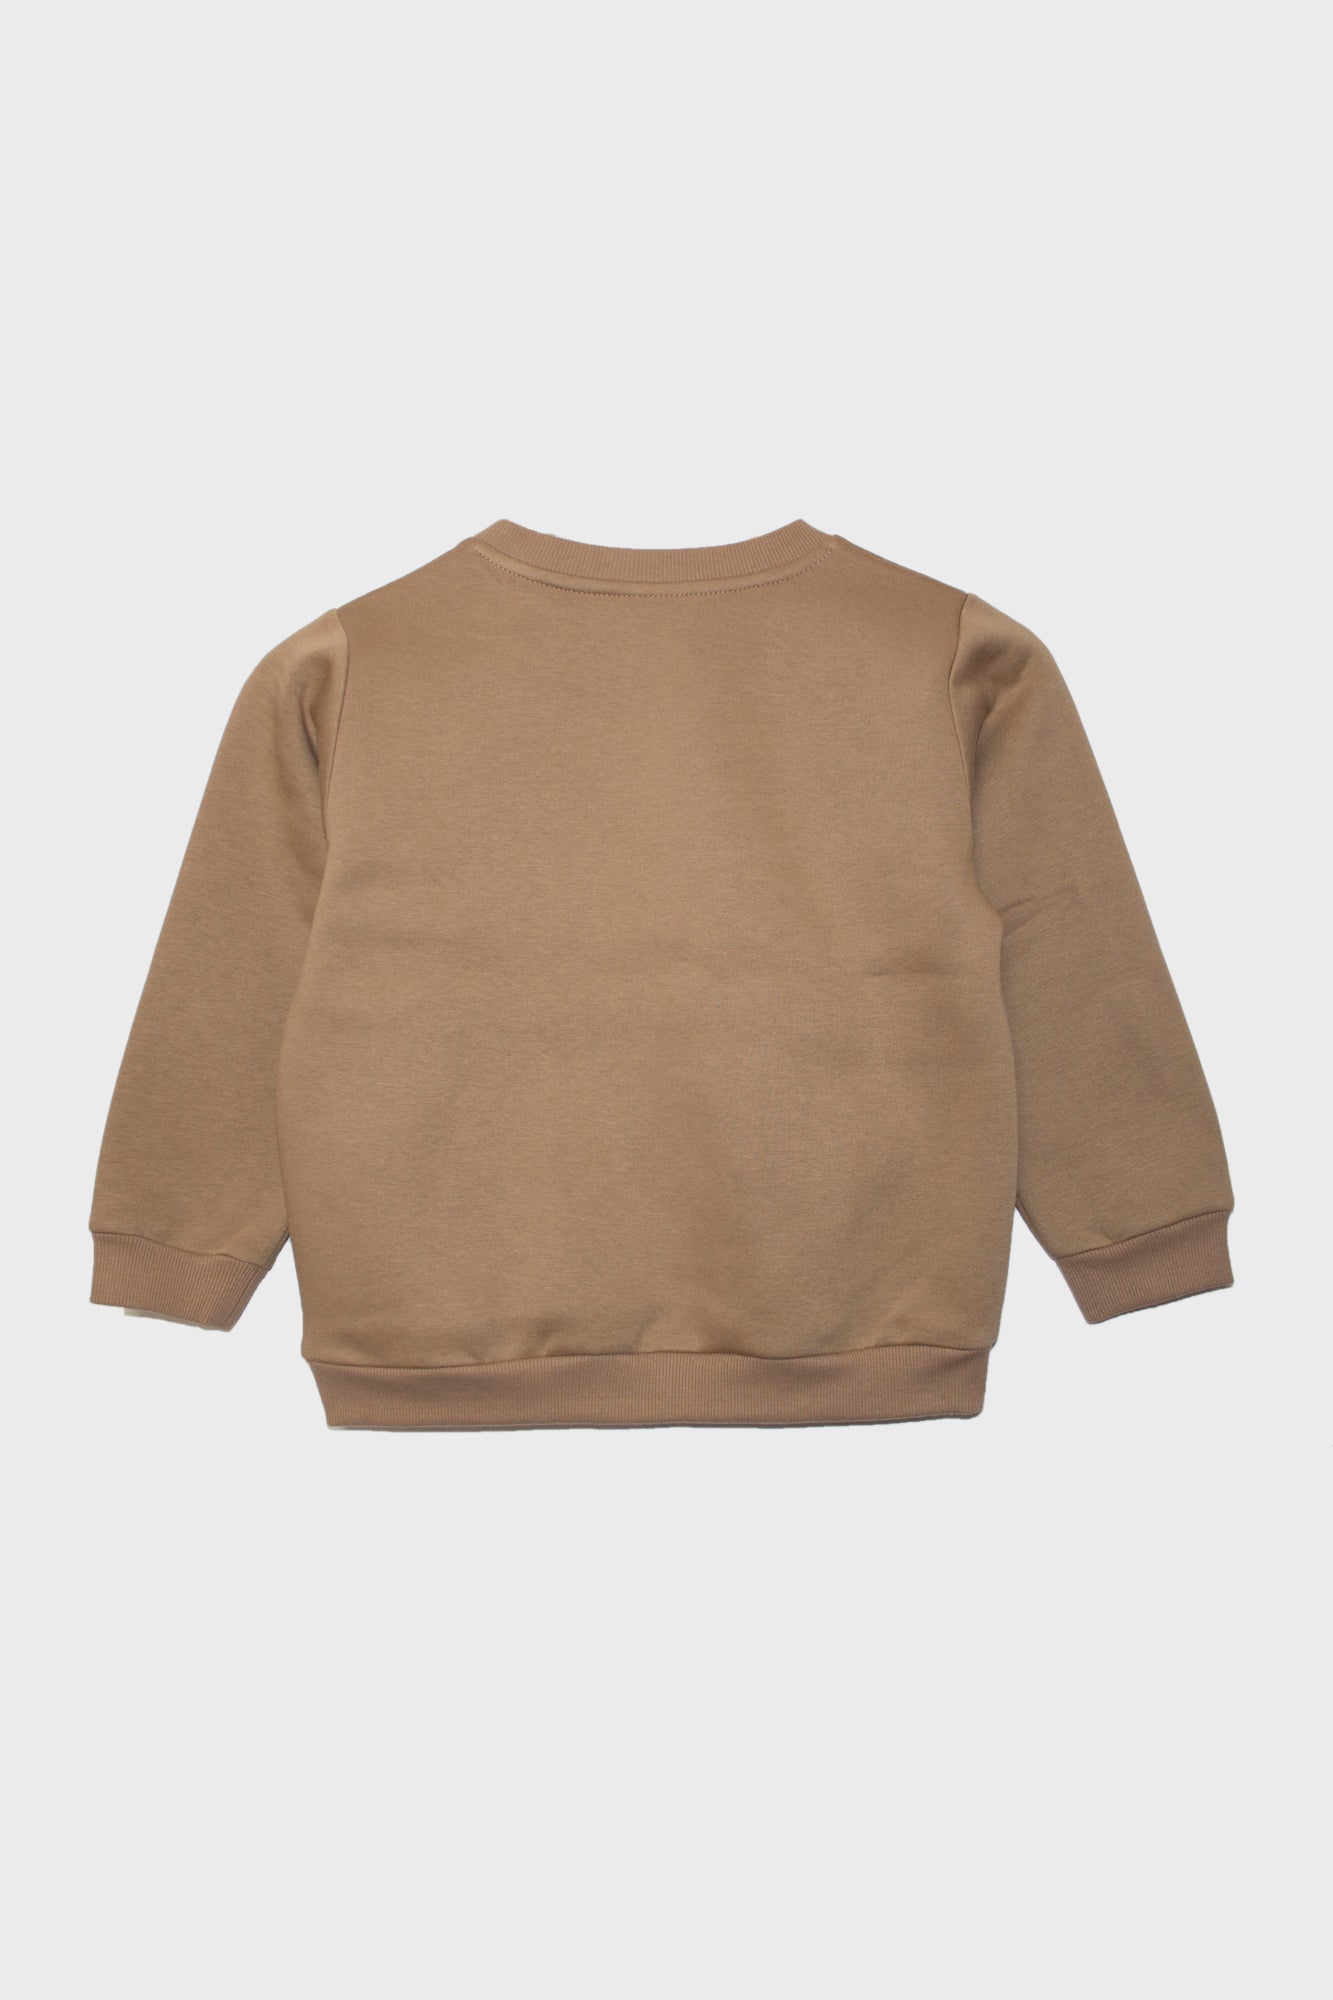 Kid’s One Wolf sweater, beige with red logo